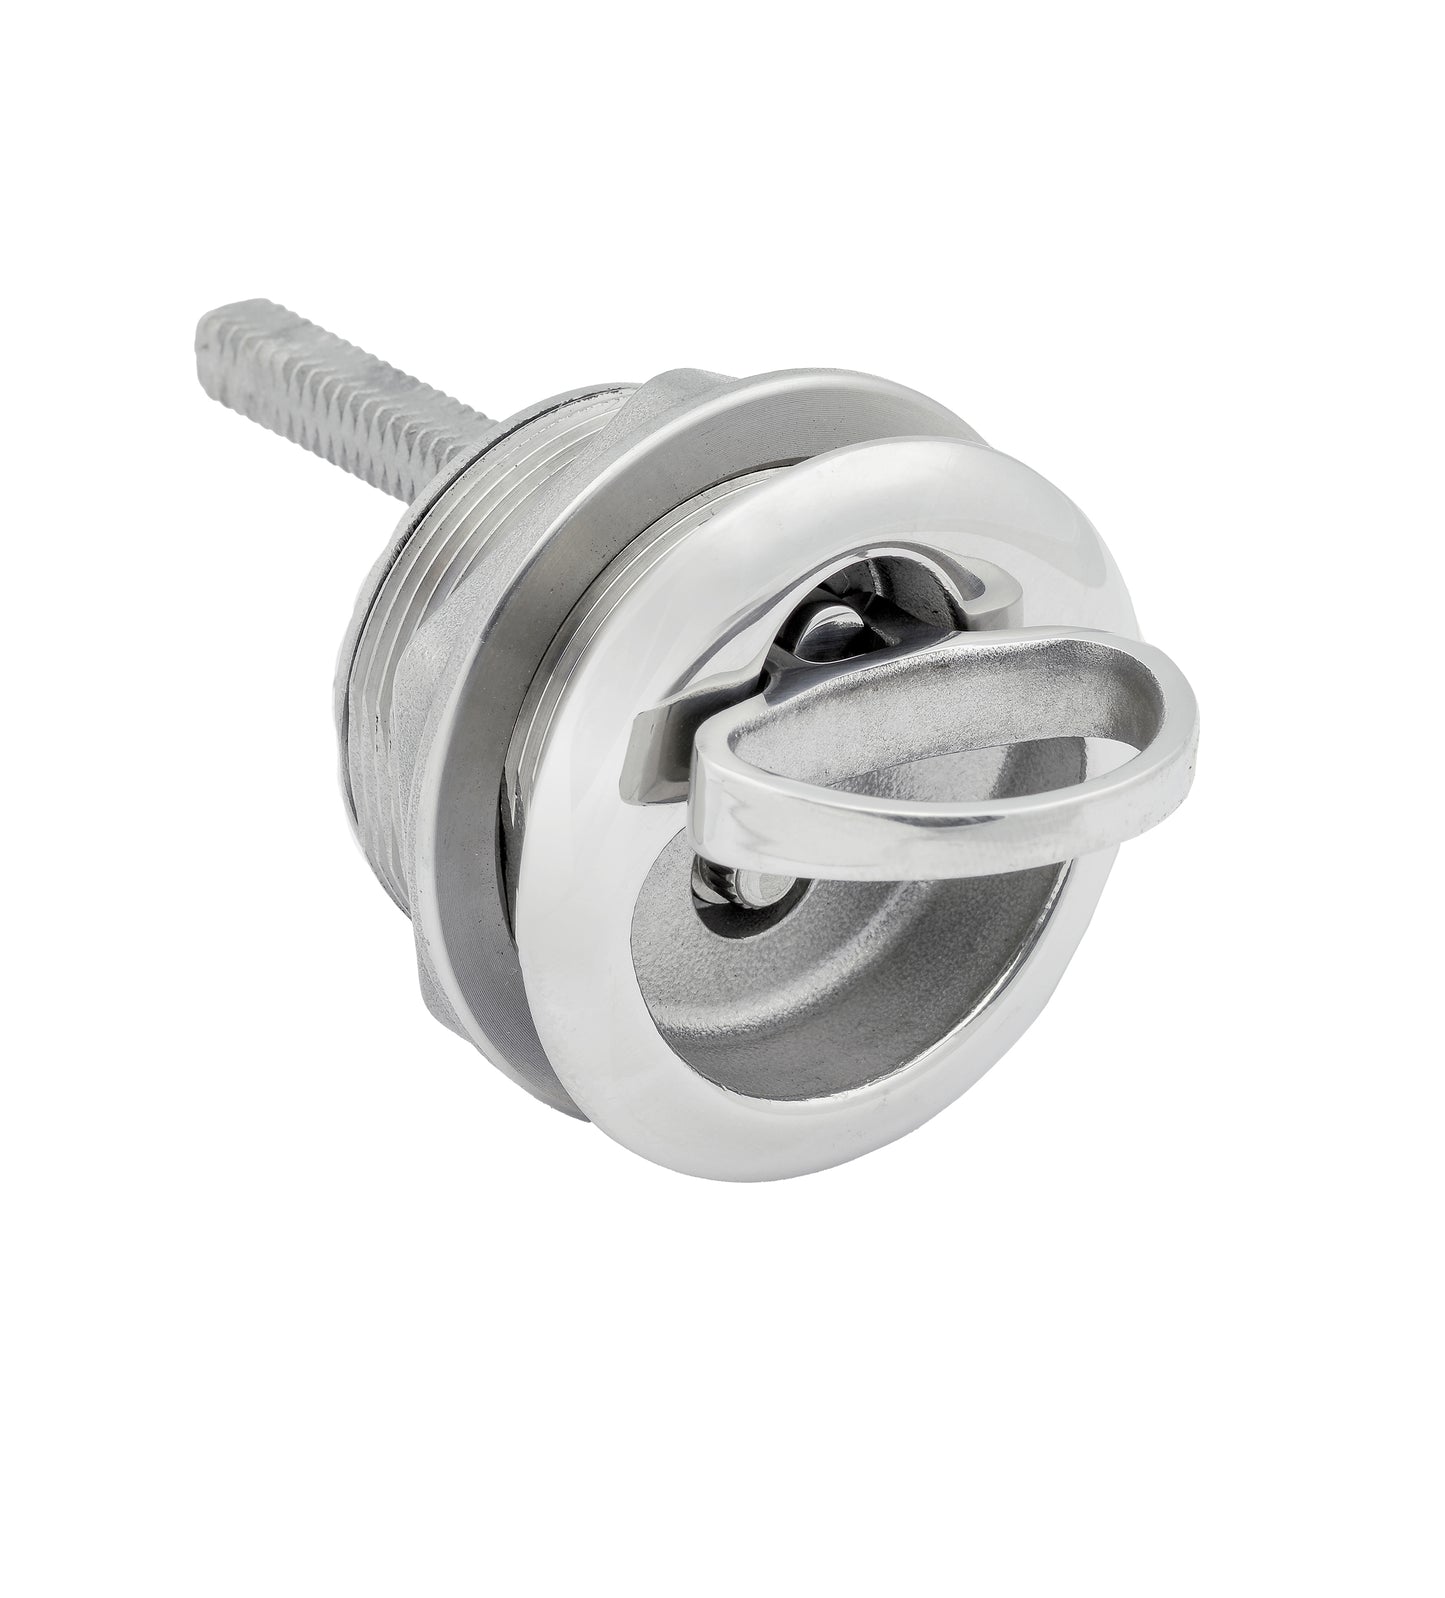 D- Style Locking Compression Handle - S-0336